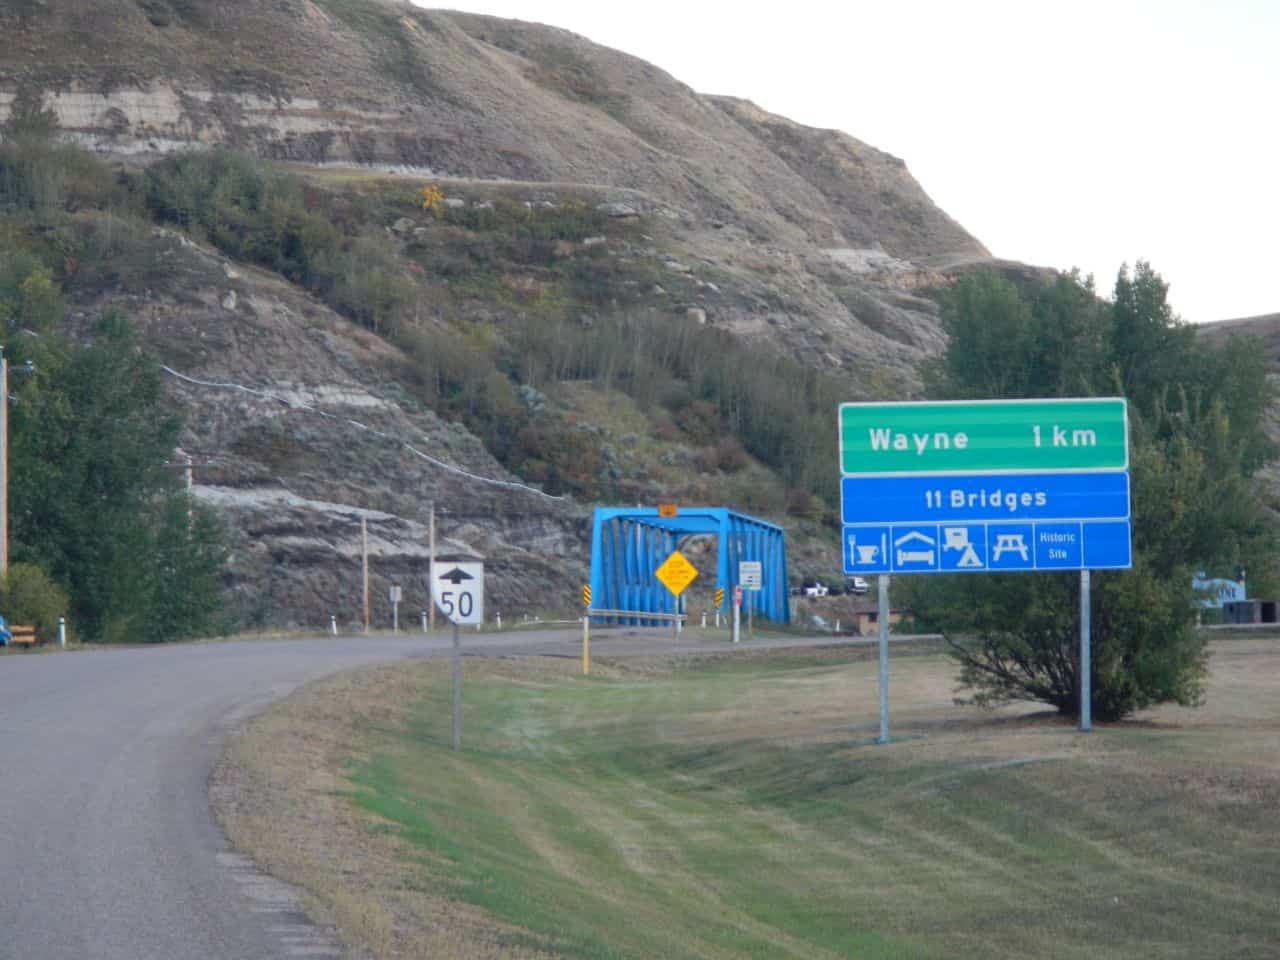 Wayne Alberta home to guiness record for most amout of bridges in shortest distance